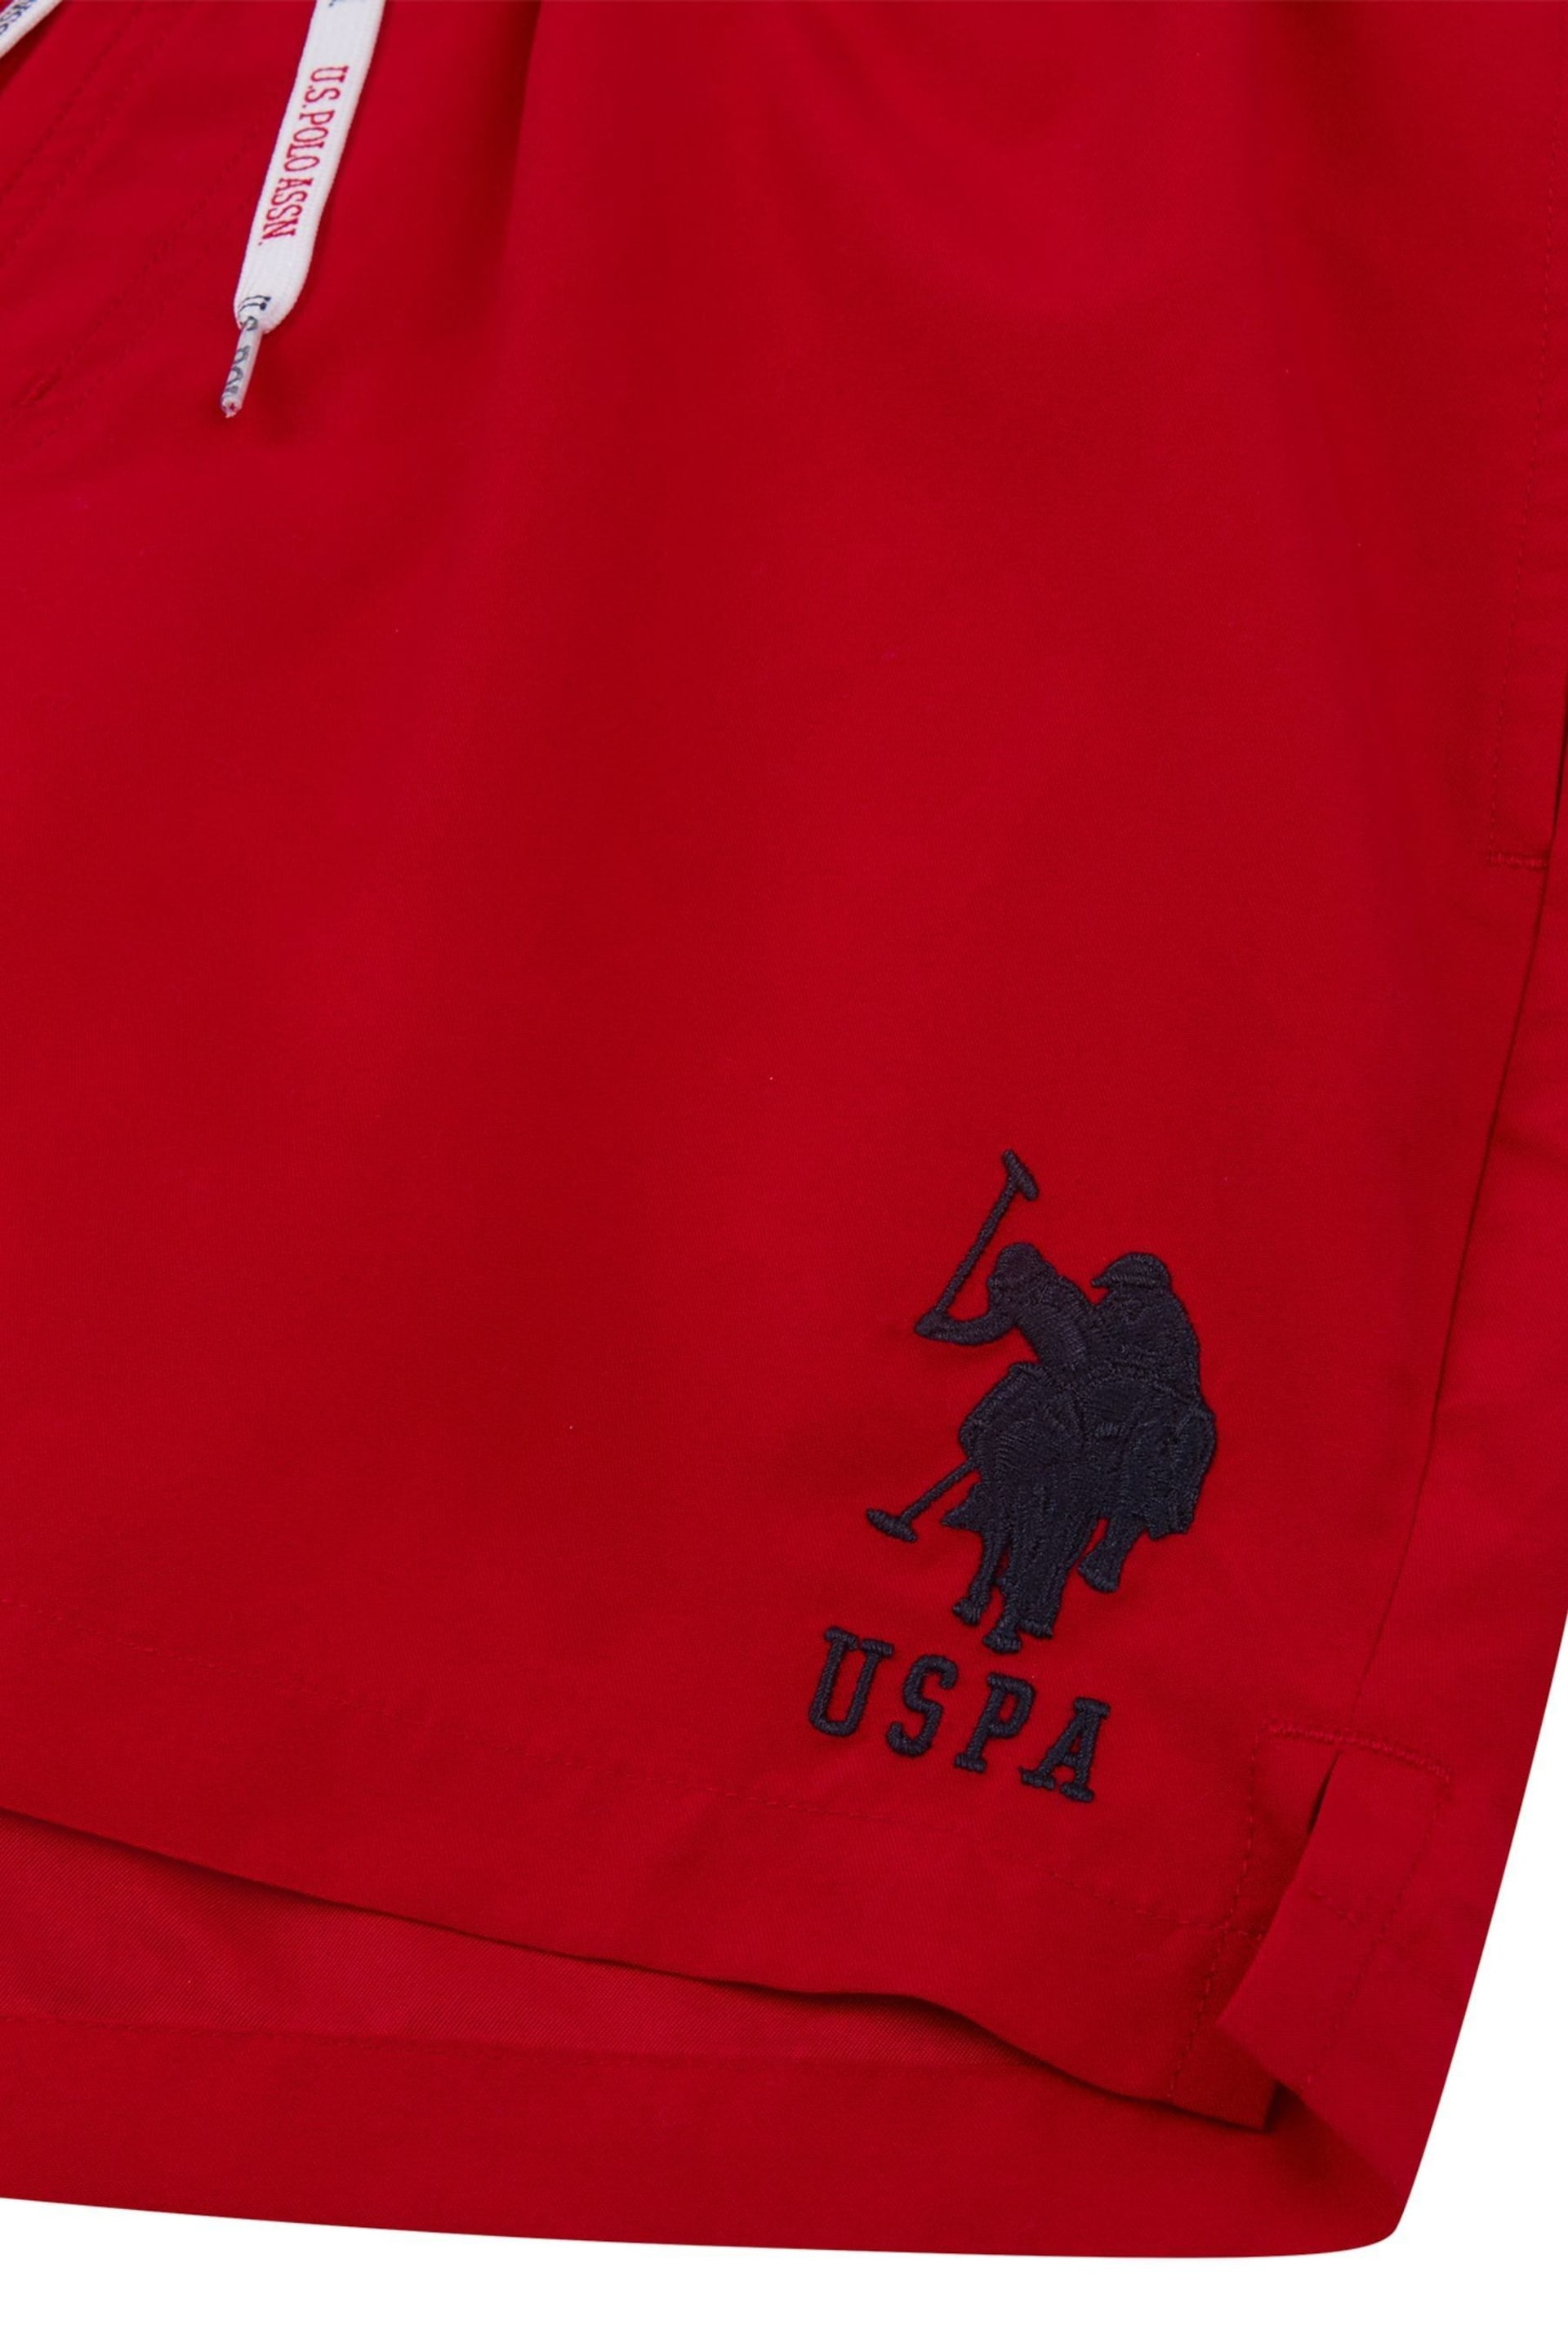 U.S. Polo Assn. Mens Red Player 3 Swim Shorts - Image 3 of 5